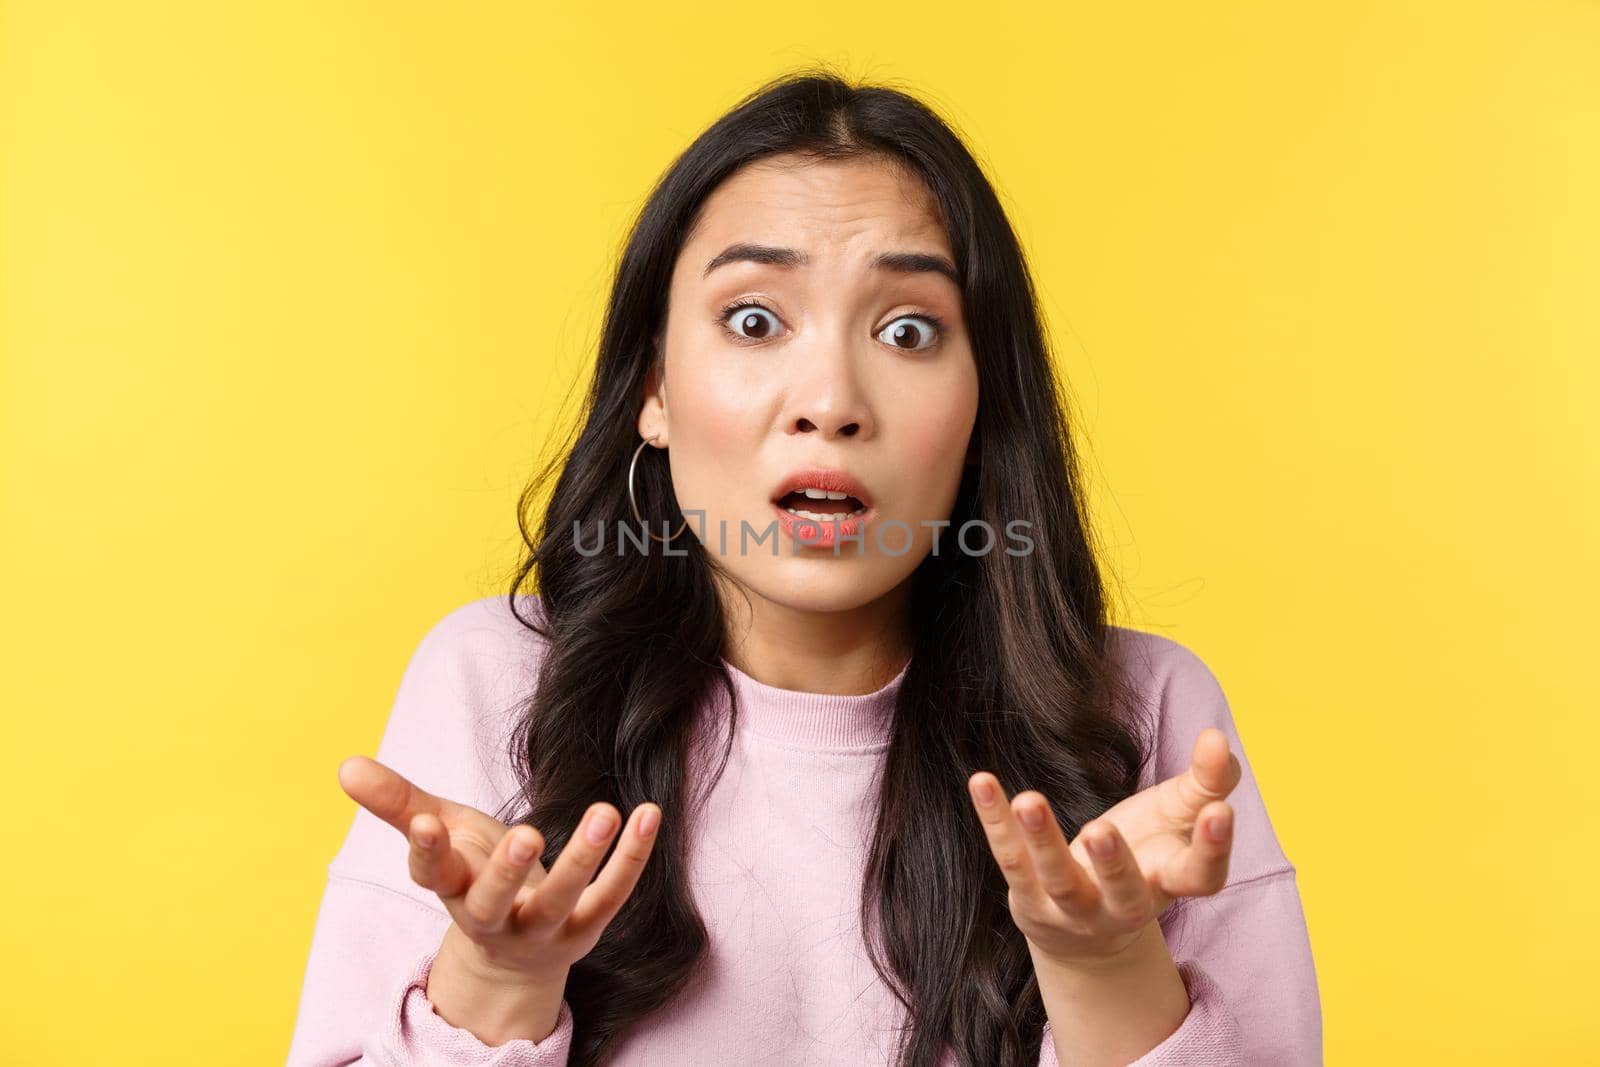 People emotions, lifestyle leisure and beauty concept. Close-up of anxious and confused asian girl cant understand what wrong, shrugging, asking question with worried face, yellow background.